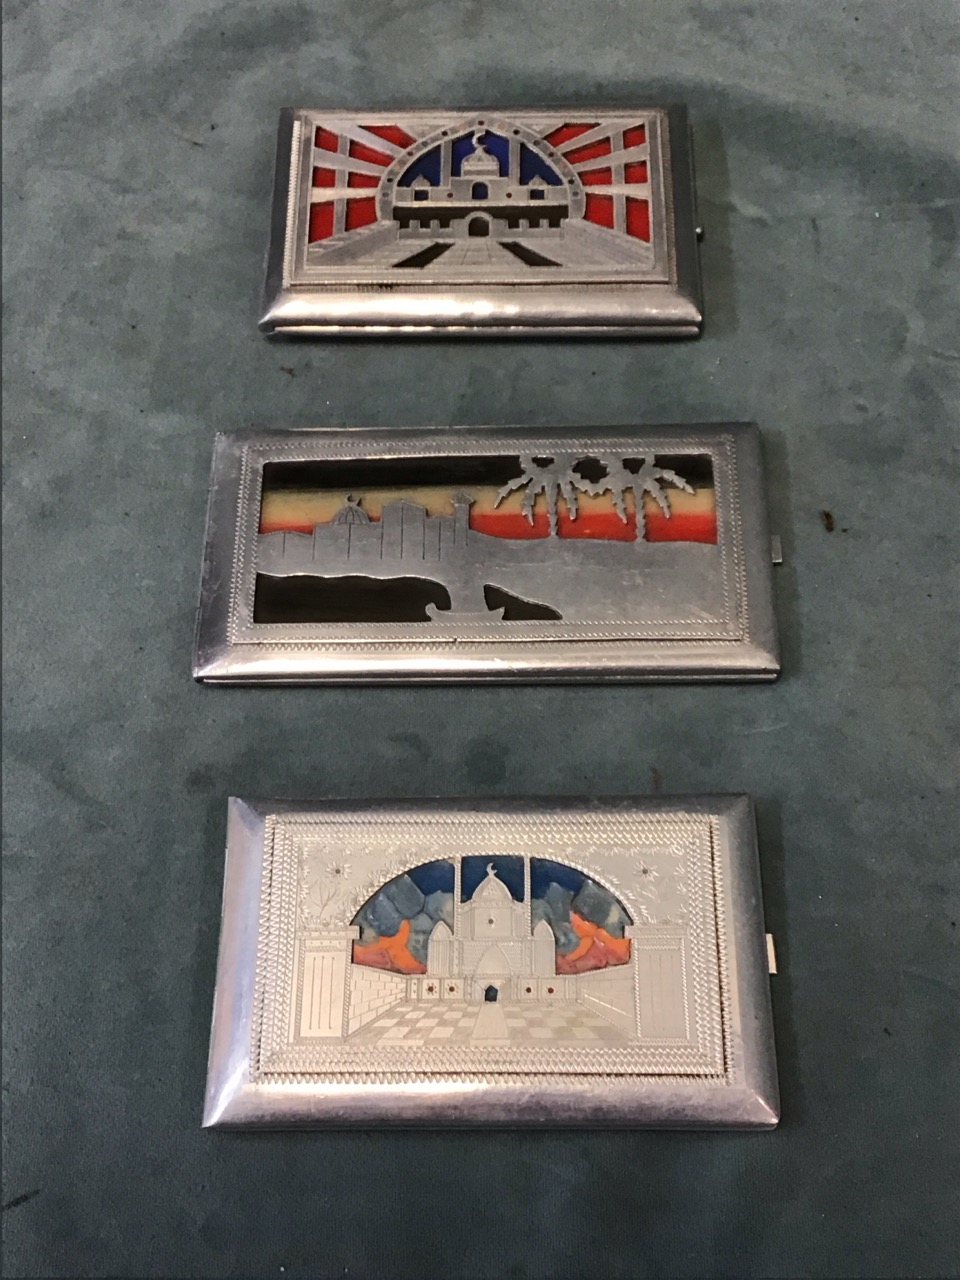 Three 40s Egyptian aluminium cigarette boxes, with pierced, painted and engraved decoration - one